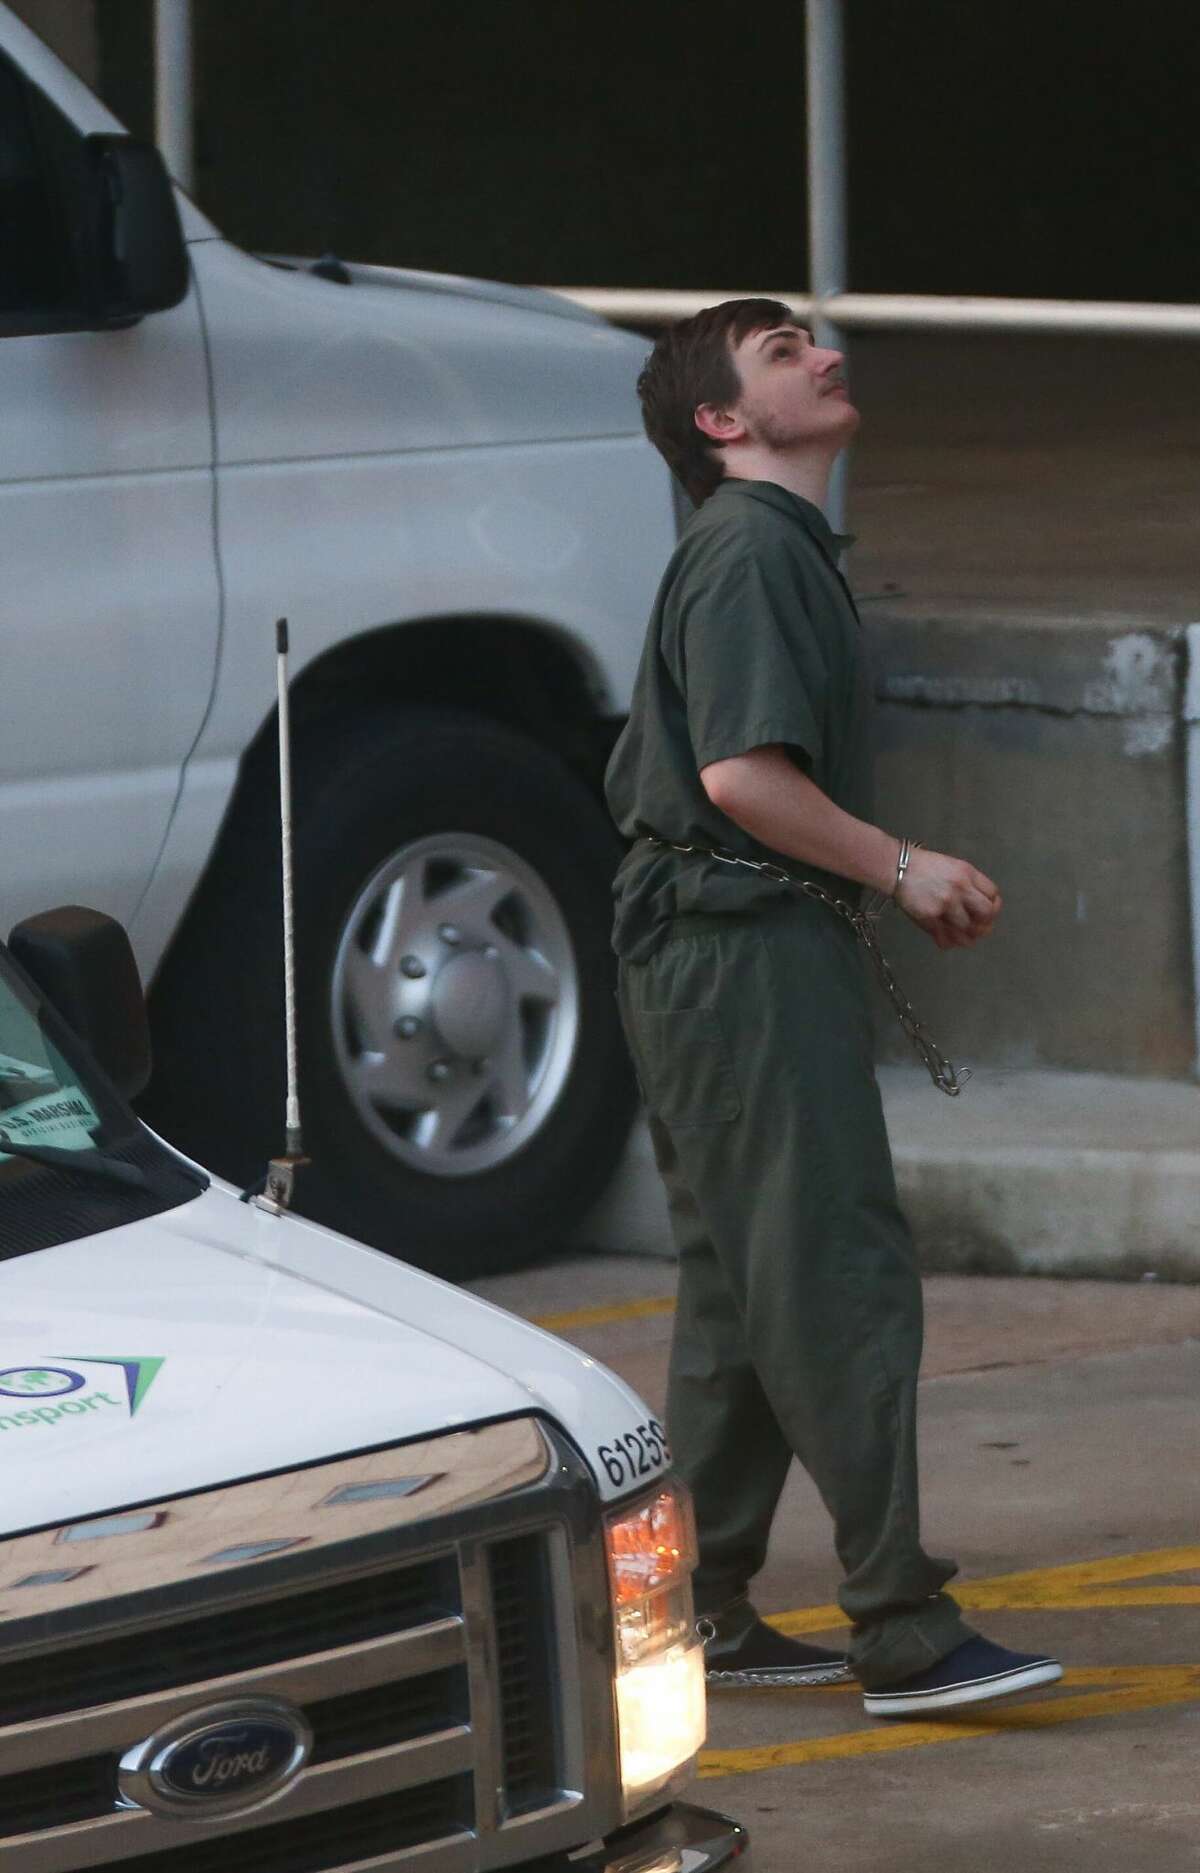 Andrew Cecil Schneck, accused of trying to bomb the statue of a confederate officer in Hermann Park in August, arrives for the preliminary examination and detention hearing at the United States District Courthouse Tuesday, Sept. 19, 2017, in Houston.